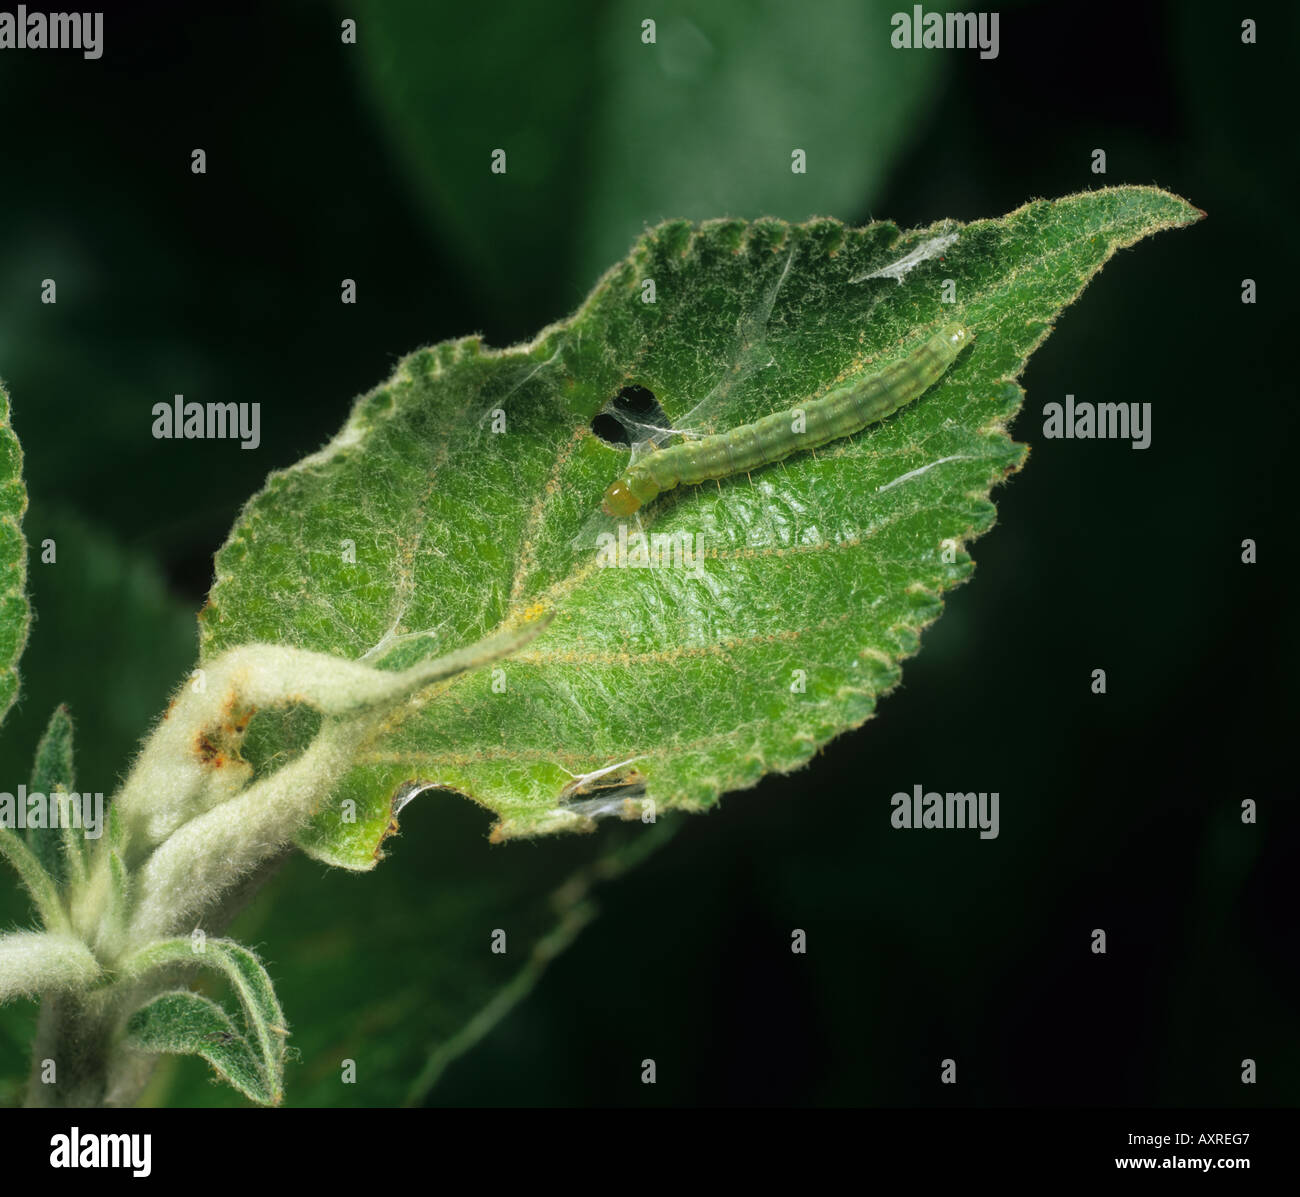 Summer fruit tortrix Adoxophyes orana caterpillar in an apple leaf fold Stock Photo